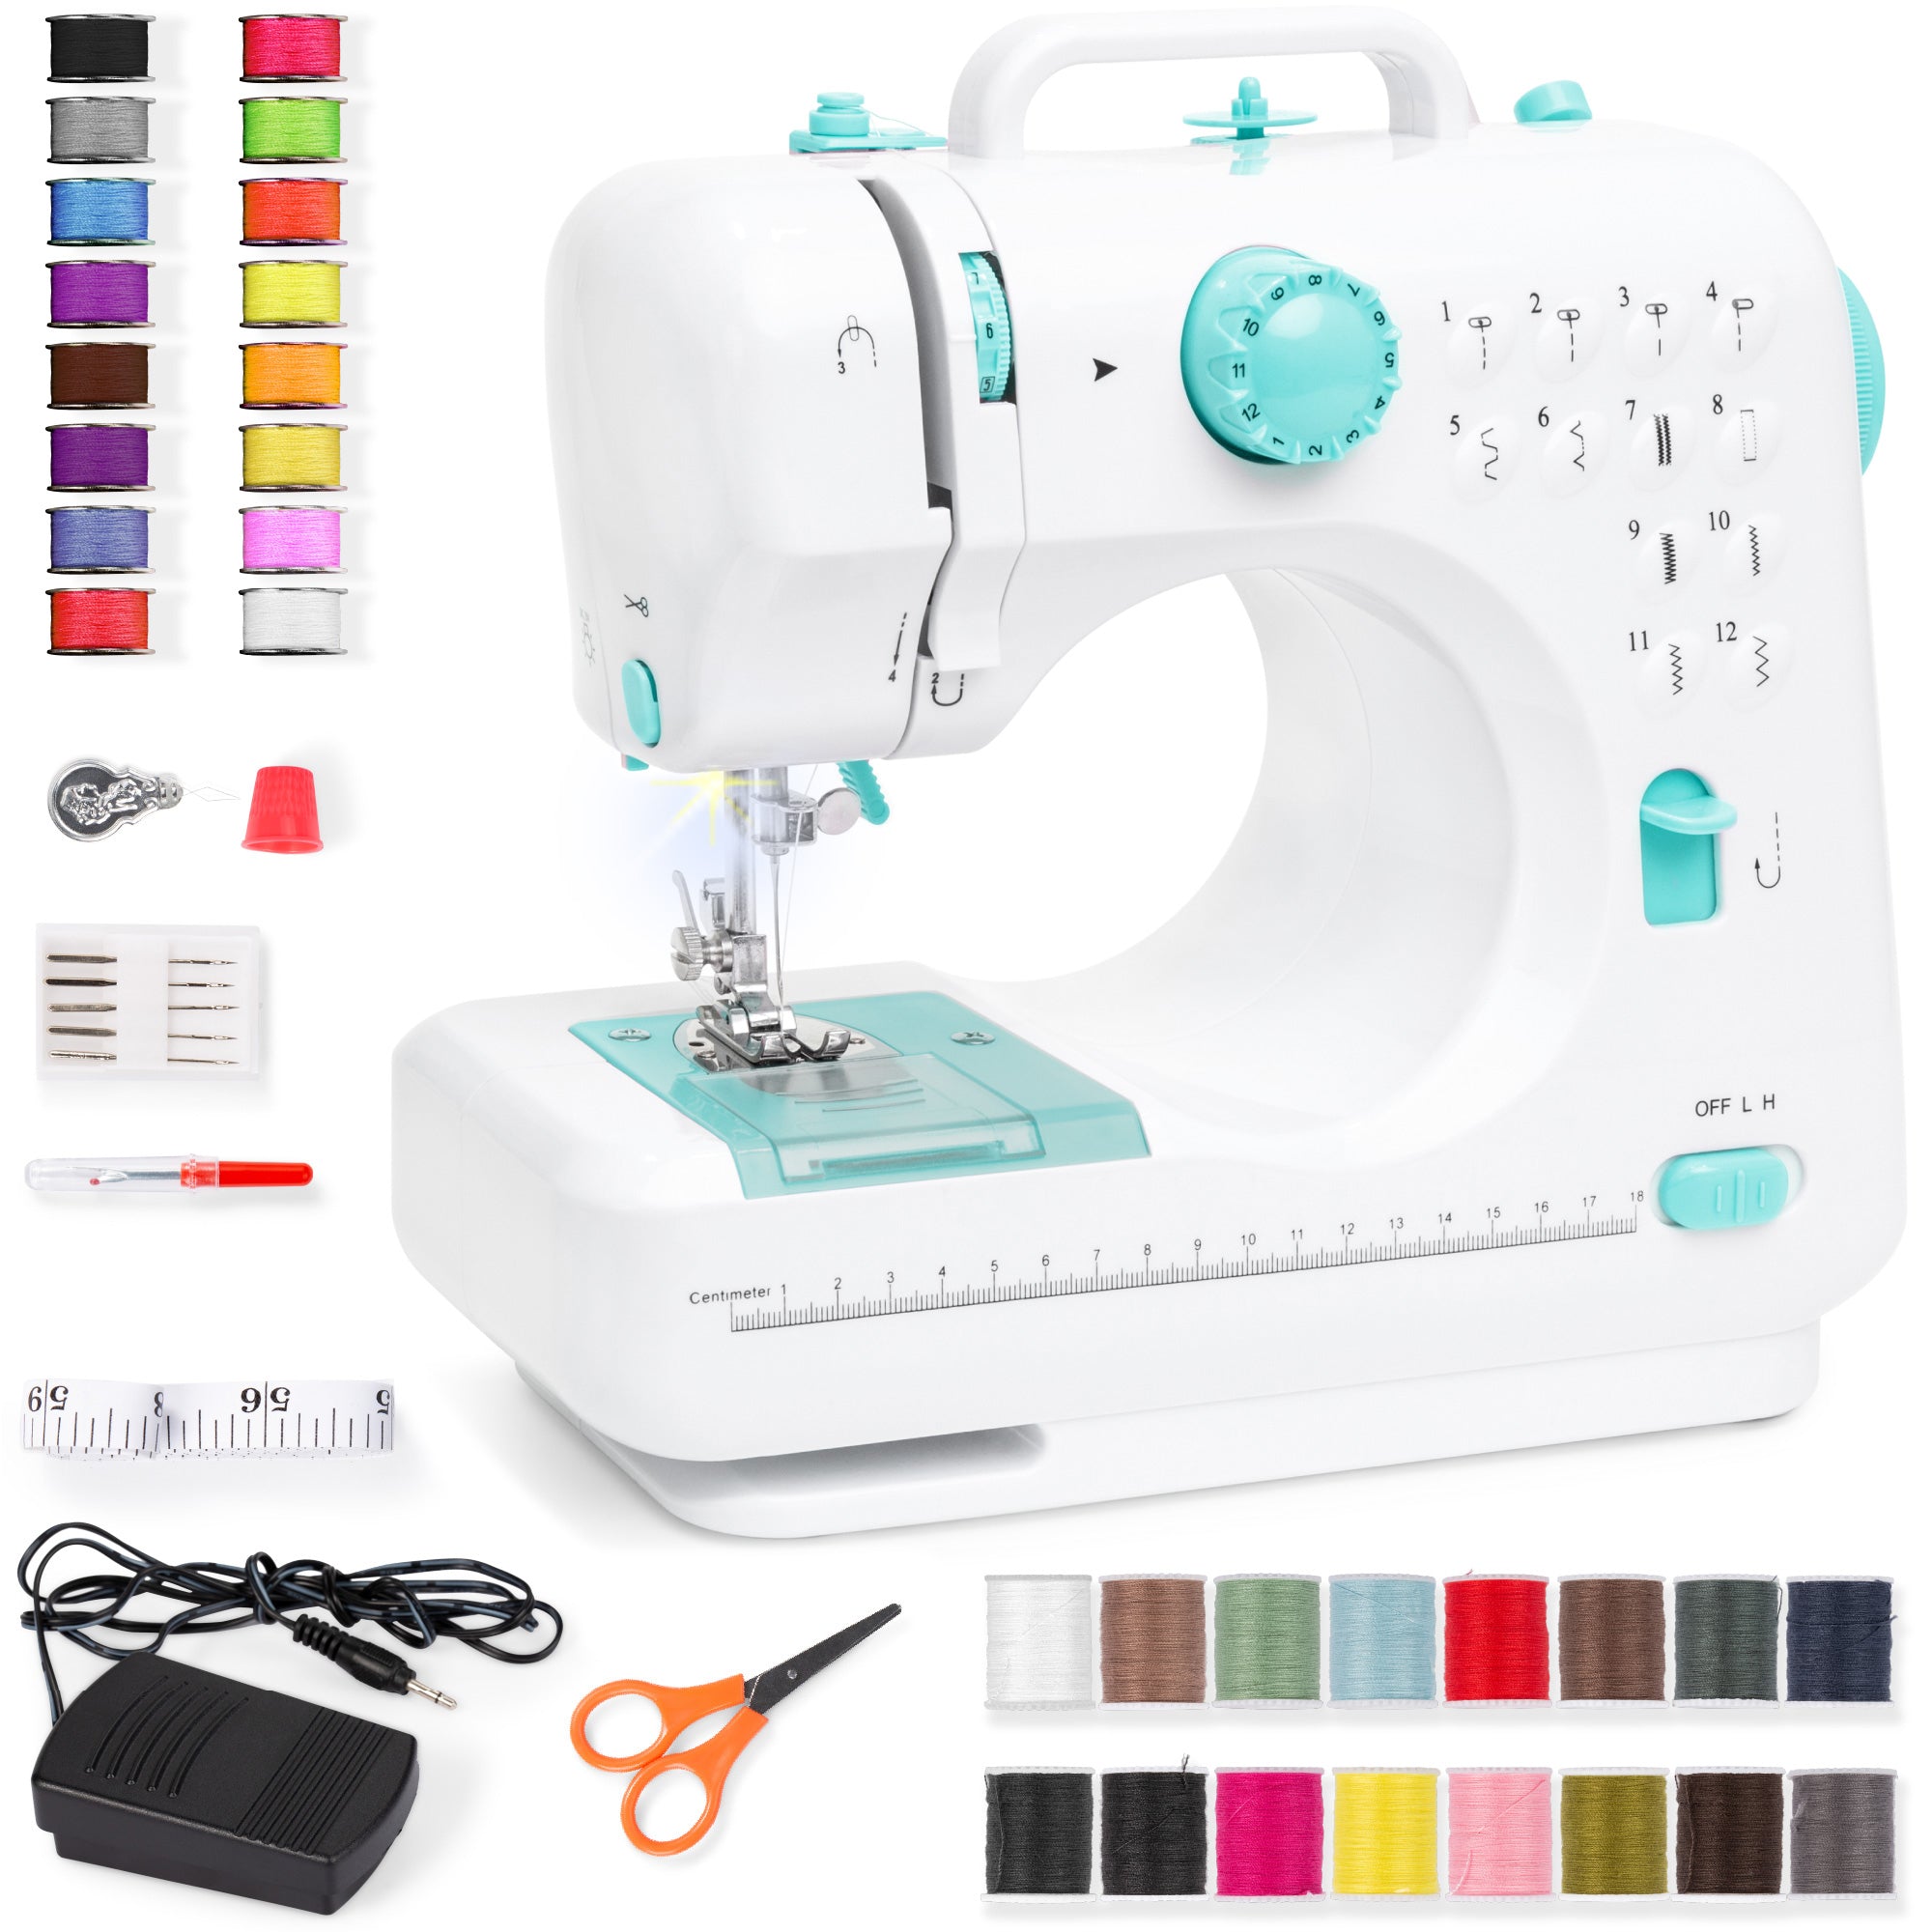 6V Foot Pedal Sewing Machine w/ 12 Patterns – Best Products